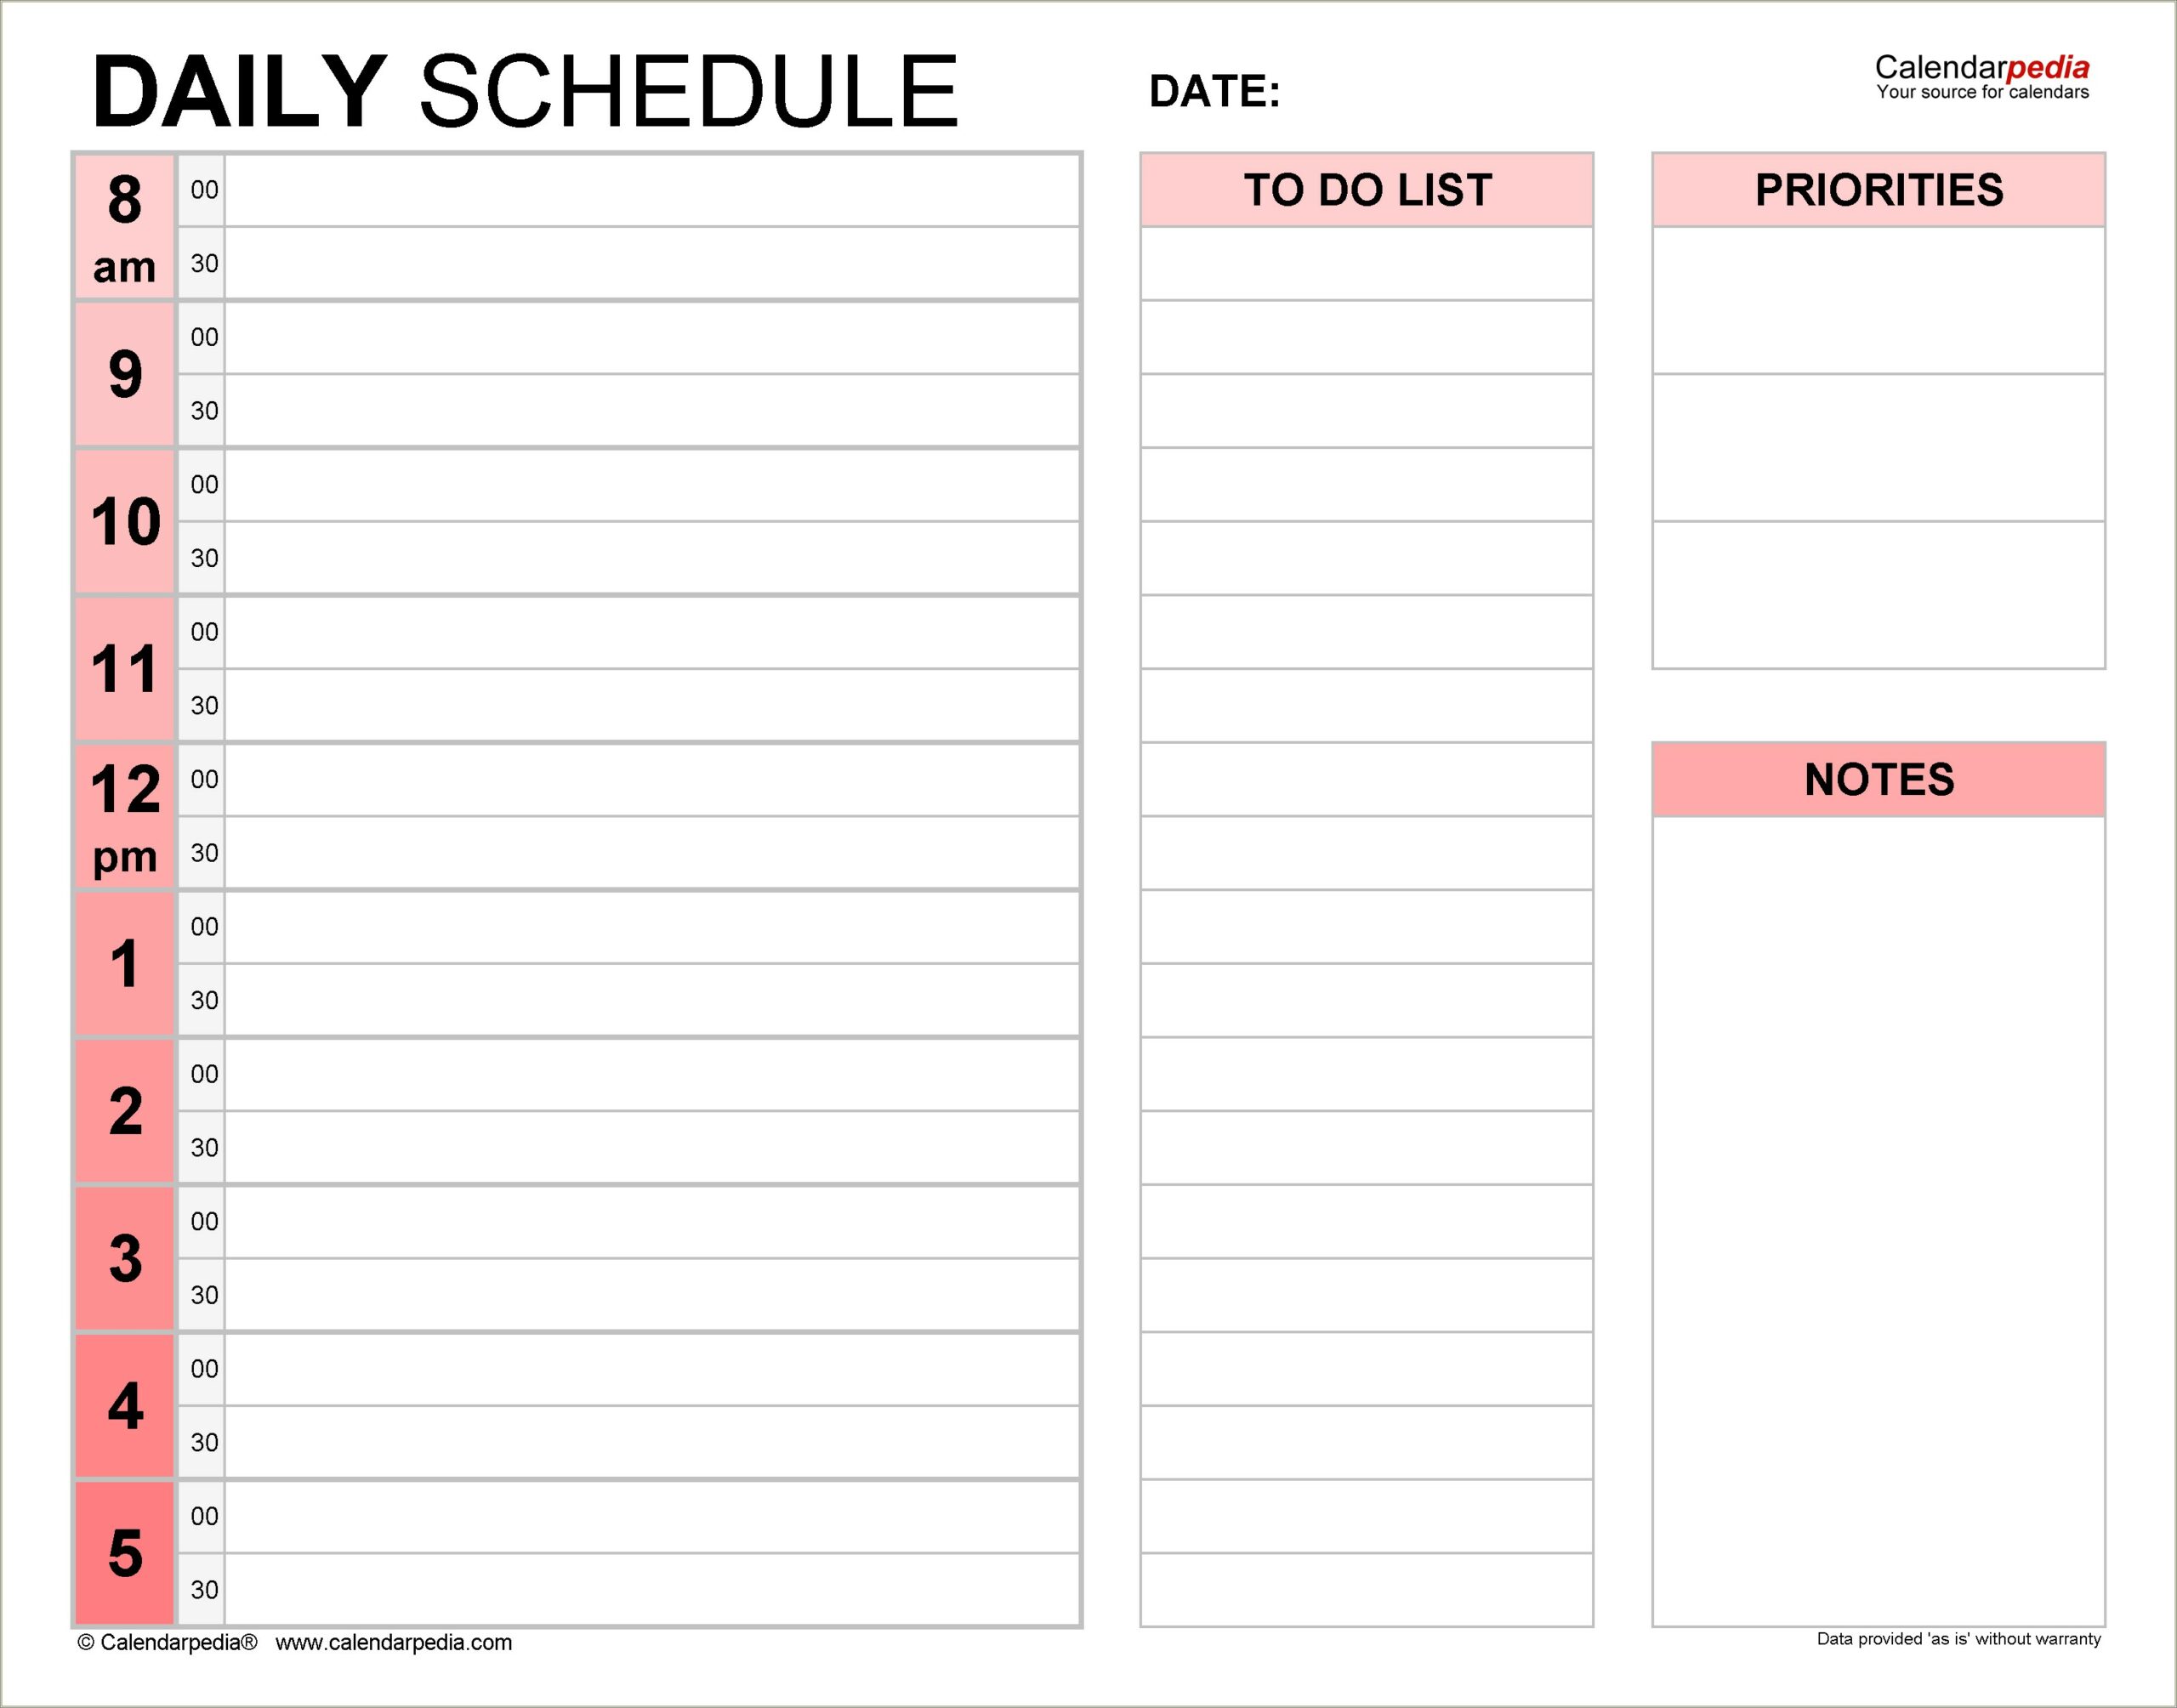 Excel Schedule Template Daily Free For 20 Employees